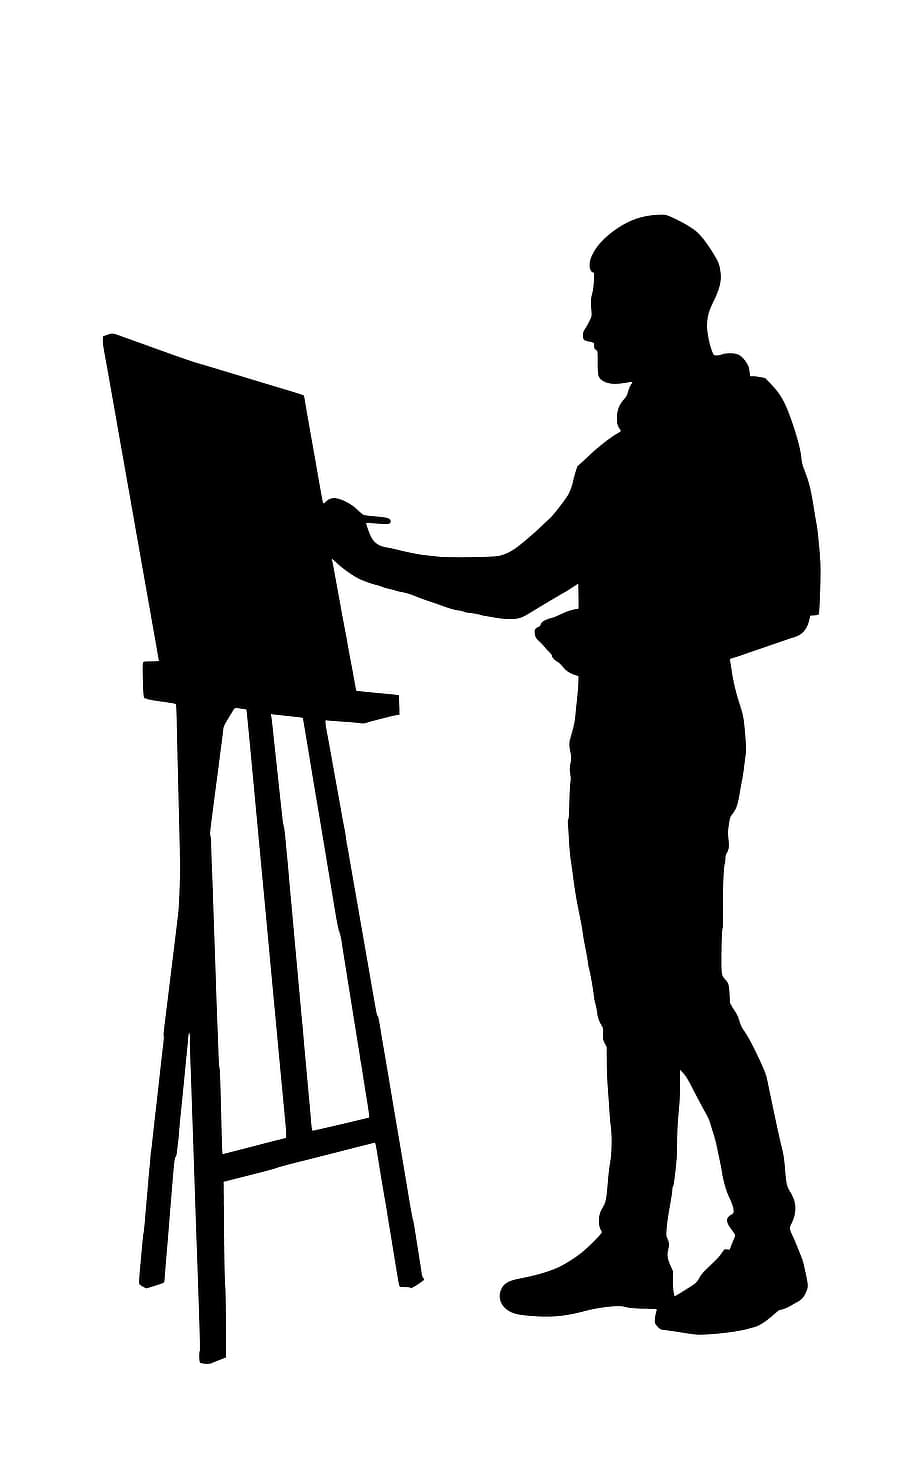 illustration, artist, standing, easel, working, painting., silhouette, drawing, painter, isolated